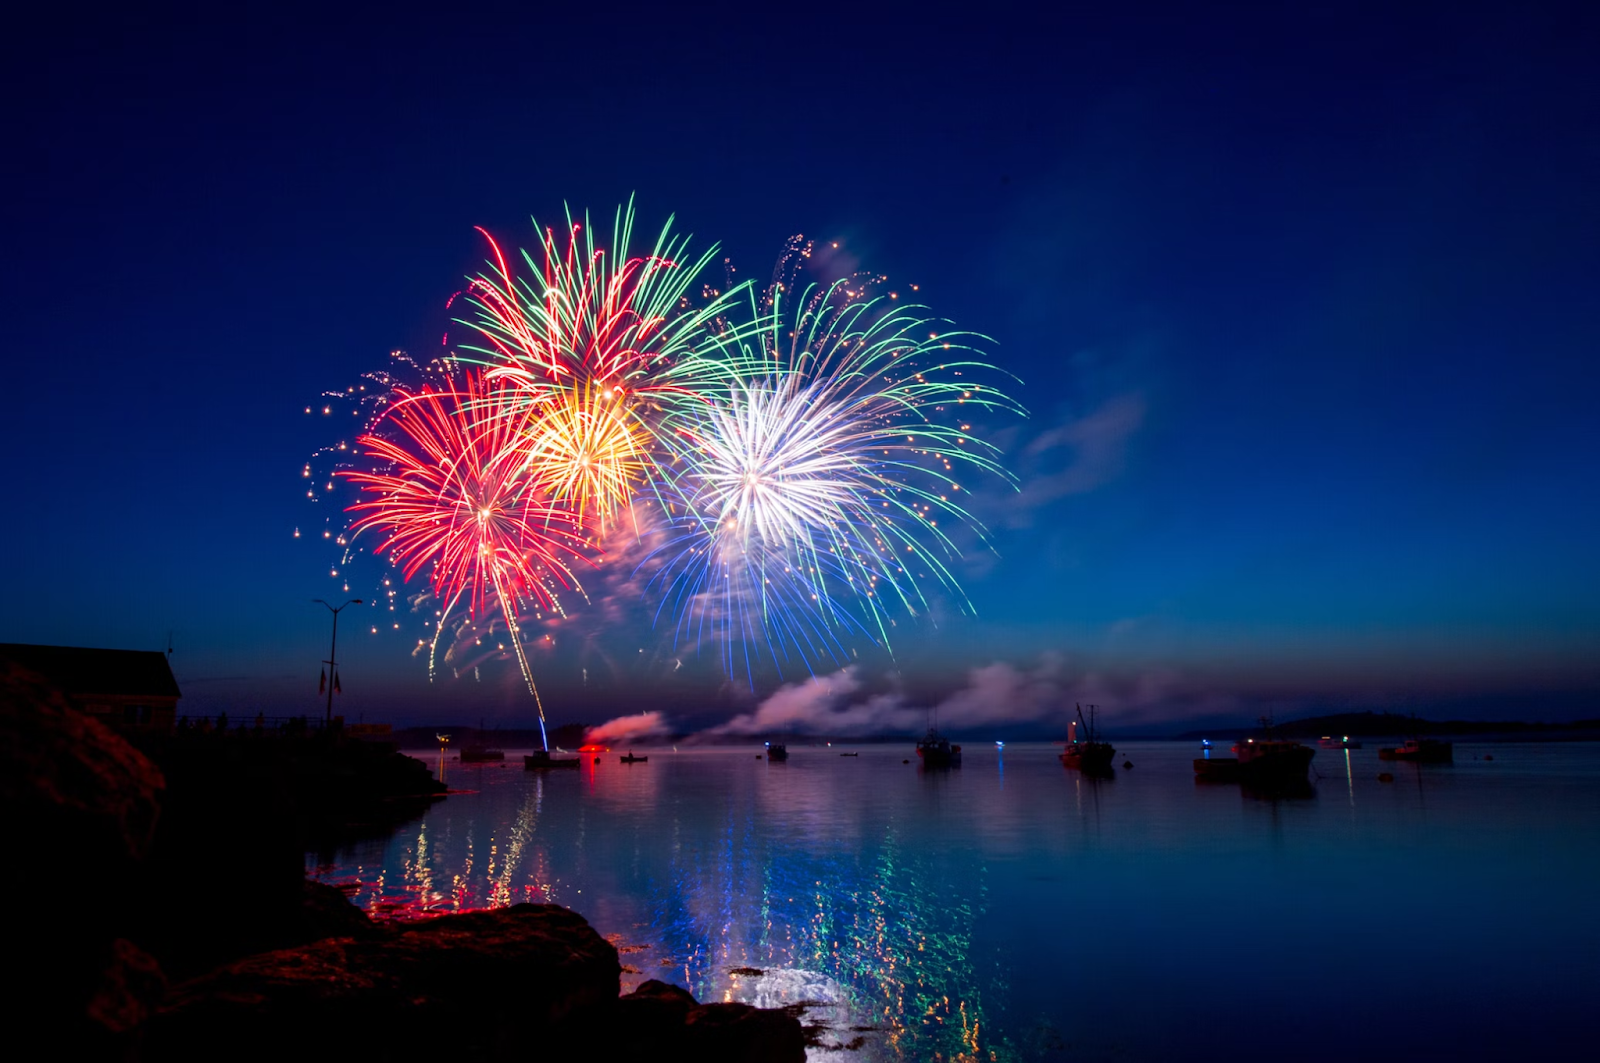 A display of amazing fireworks in the harbor of Lubec, Maine.